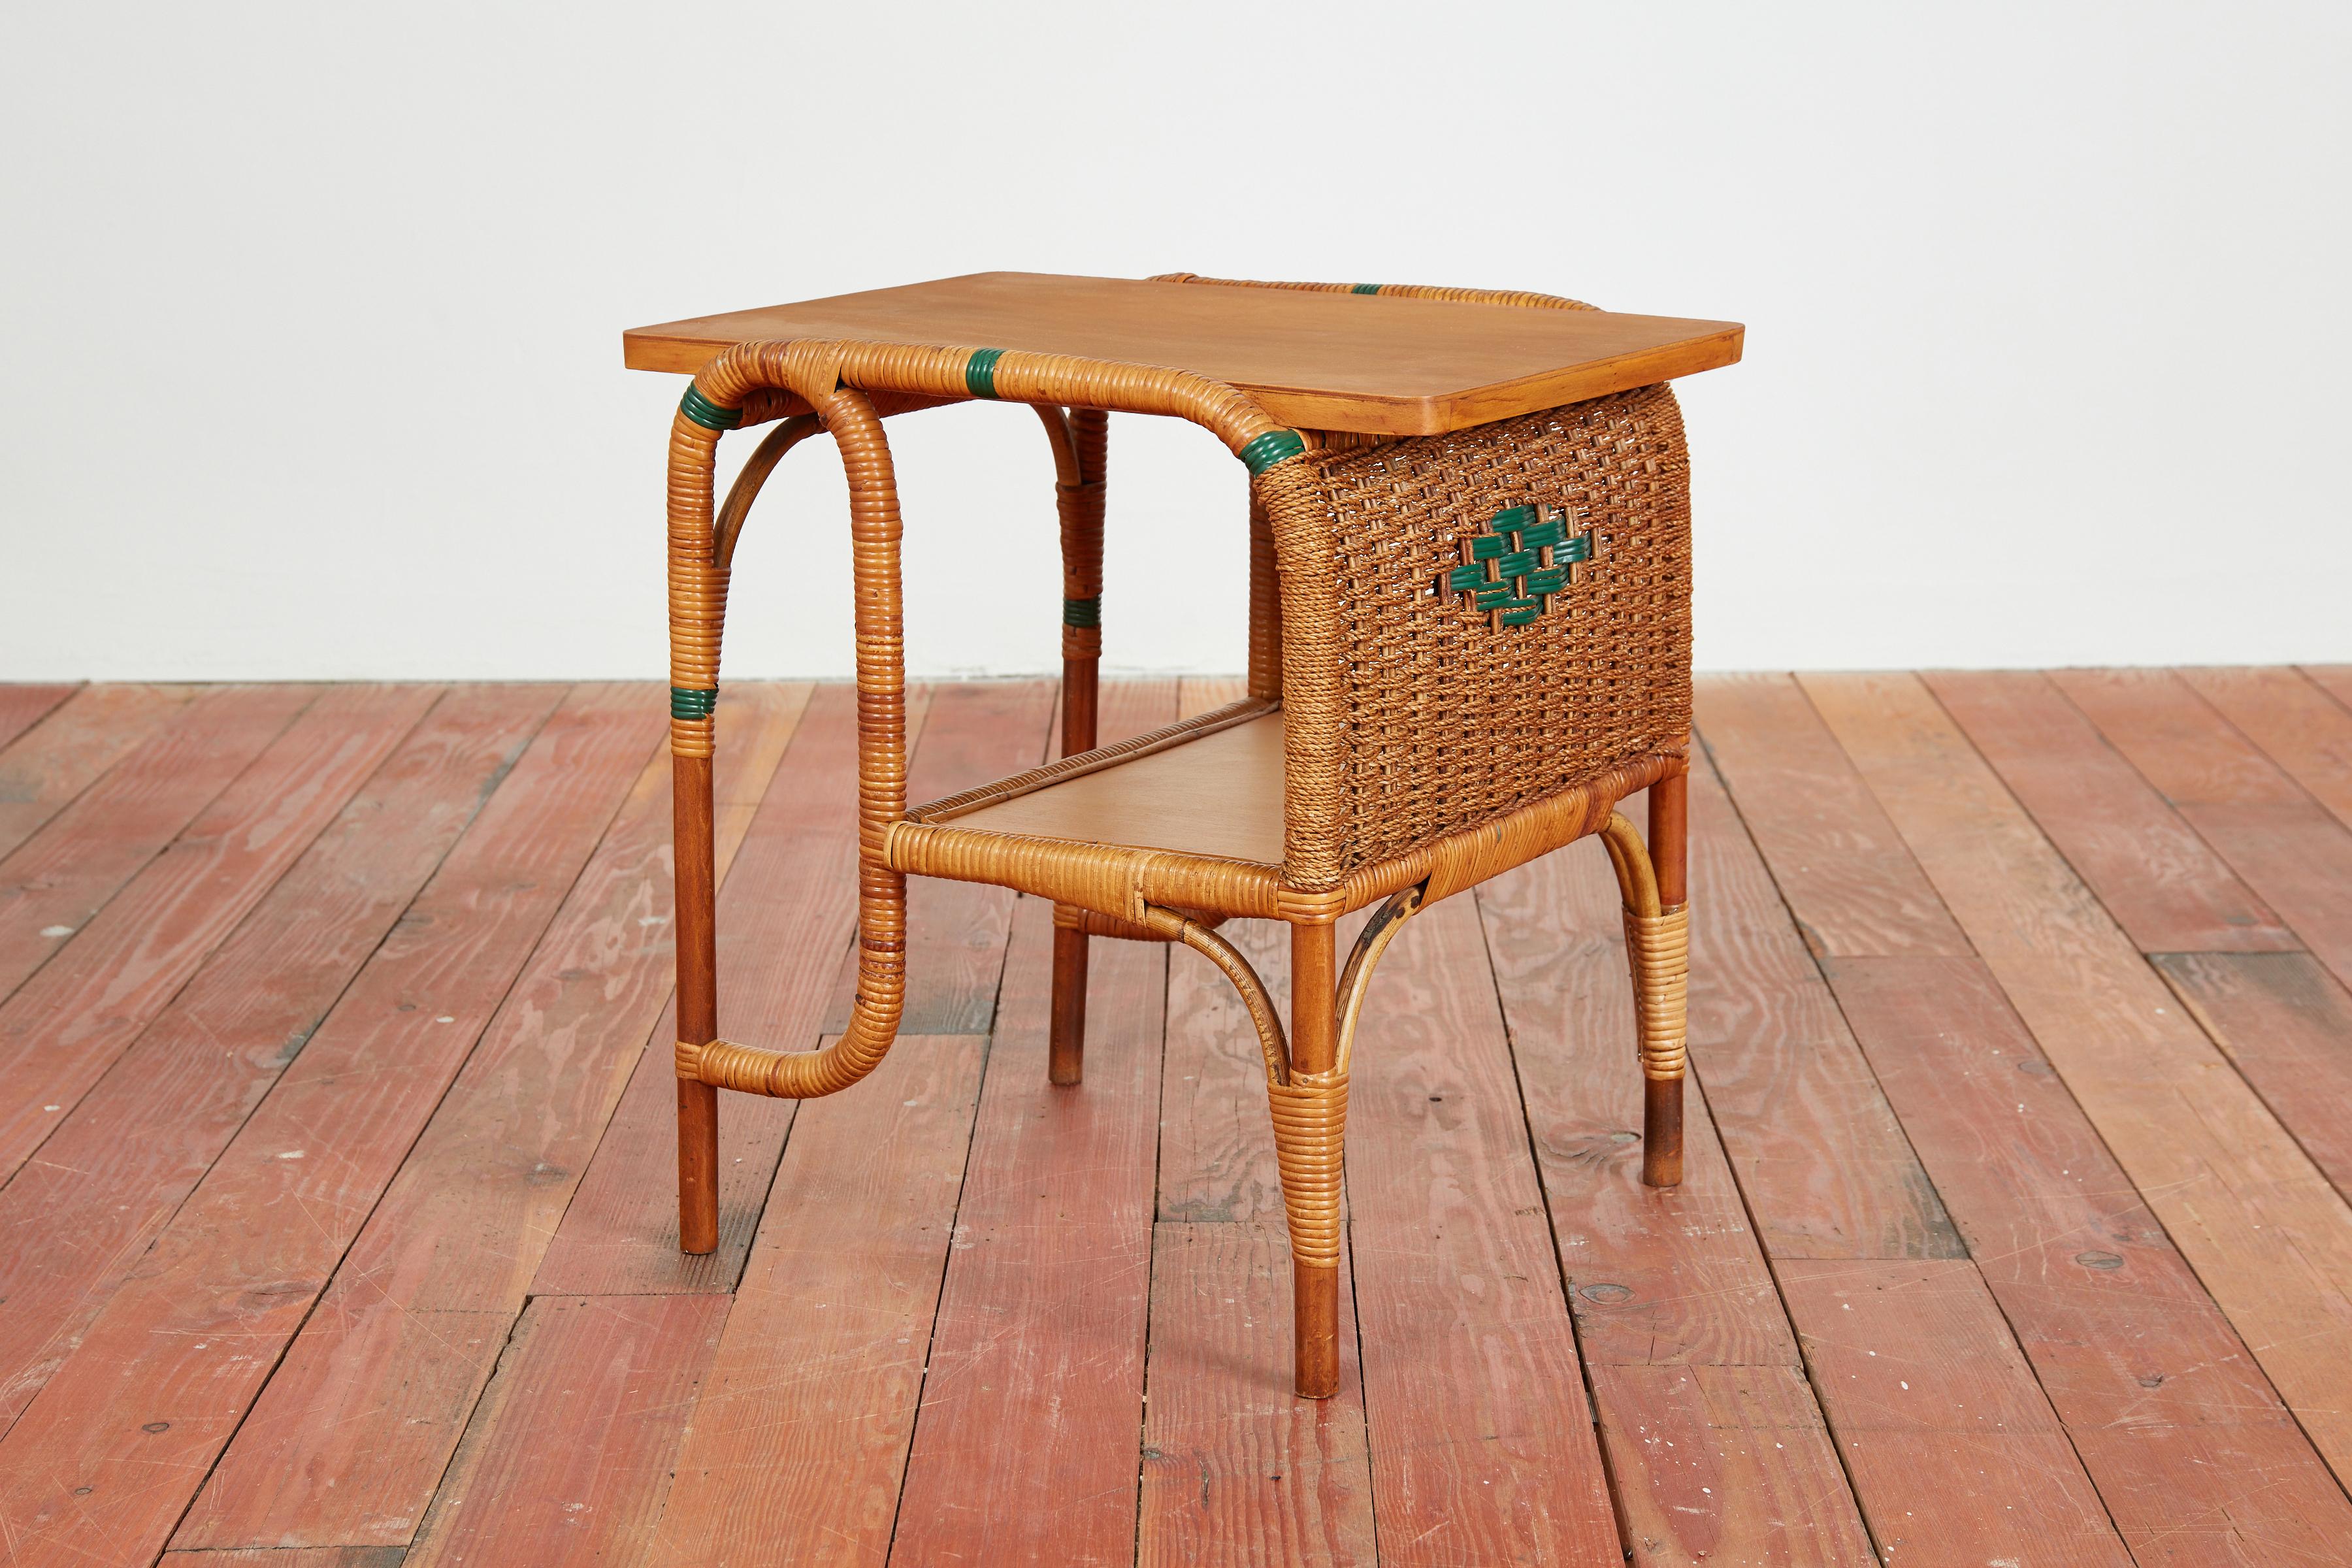 Italian bamboo and wicker side table  - Italy, 1950s
Curved bamboo structure with 2 wooden shelves wrapped in wicker with blueish/ green detail throughout. 

